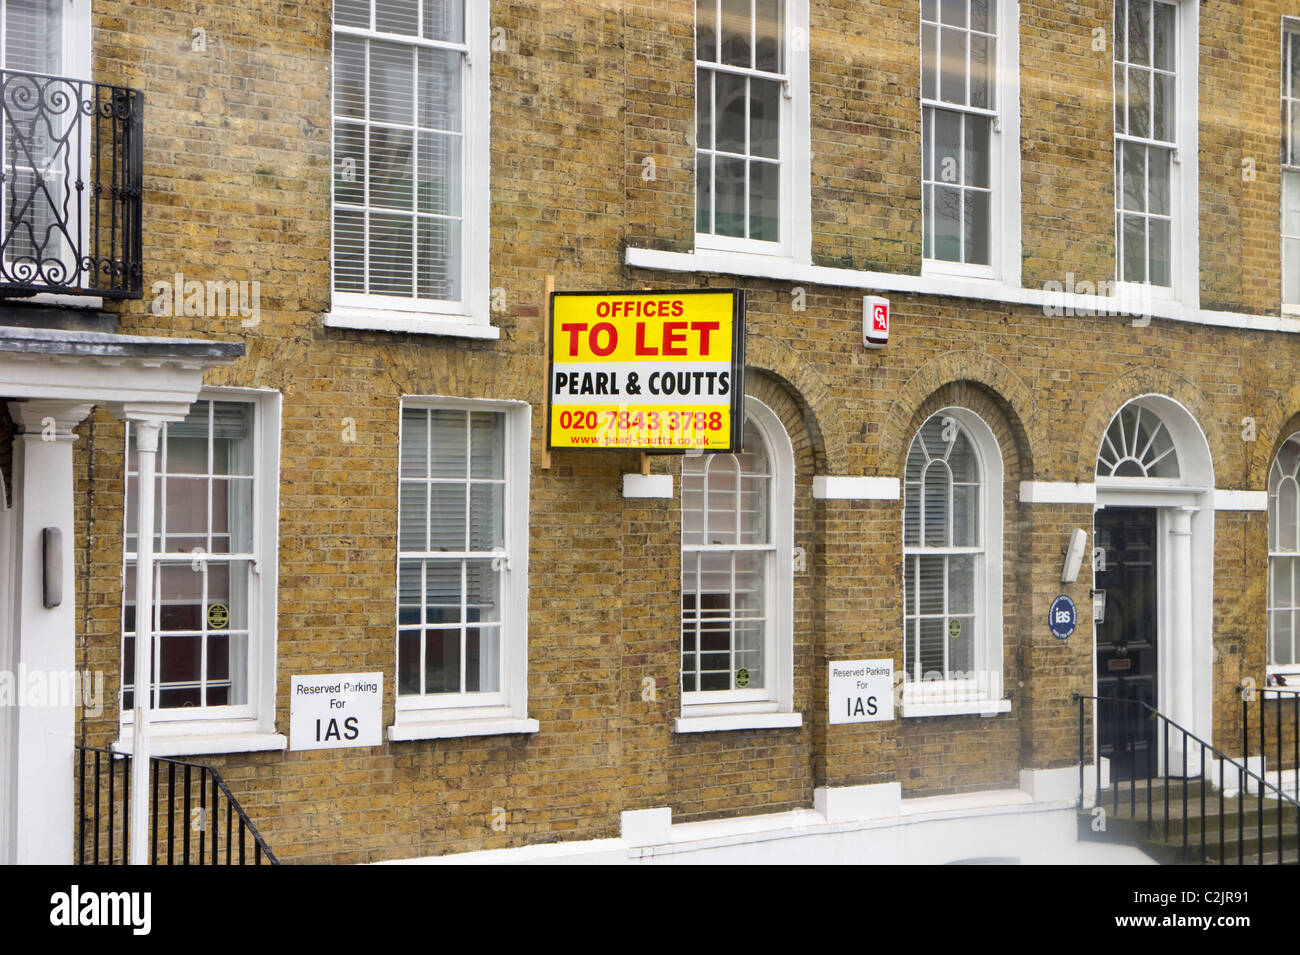 To let sign in London, England, UK, Europe Stock Photo